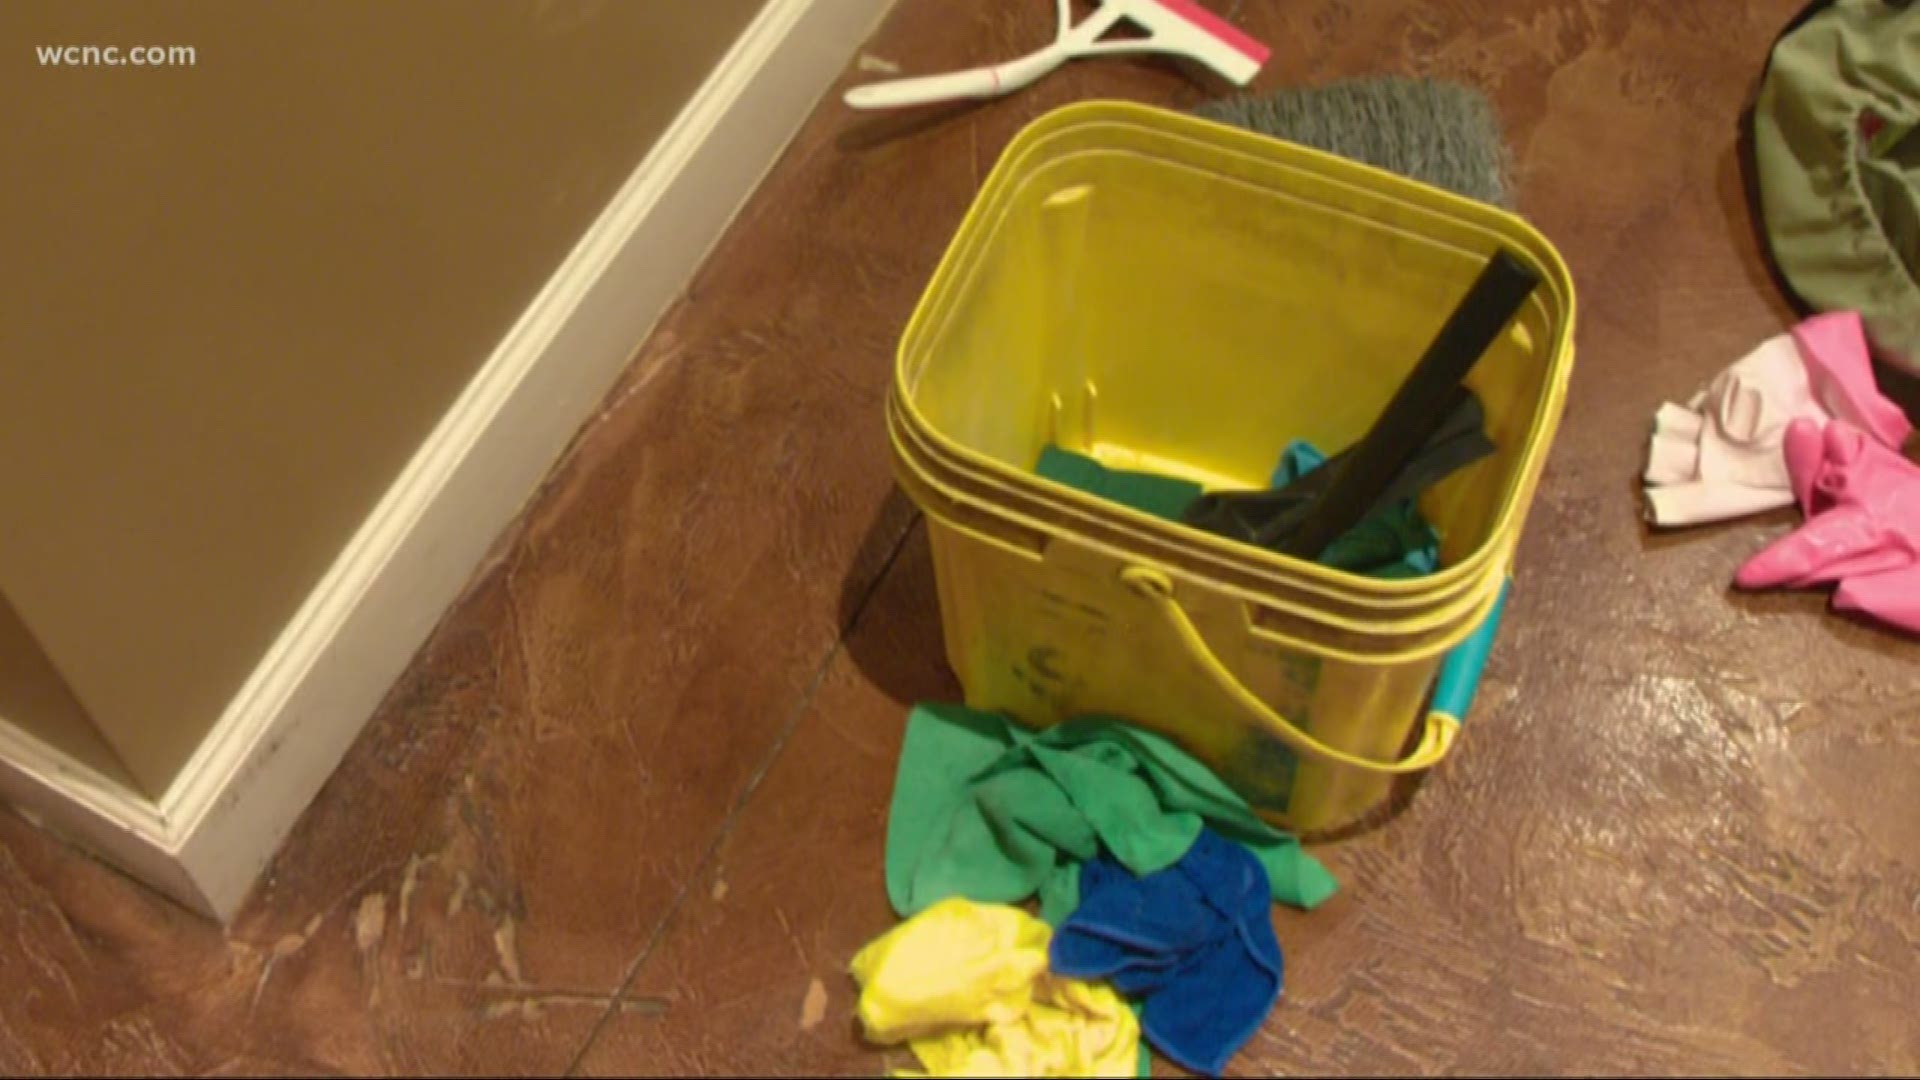 As the coronavirus hits the Charlotte area, a local cleaning company says business is booming with concerned residents wanting their homes cleaned.